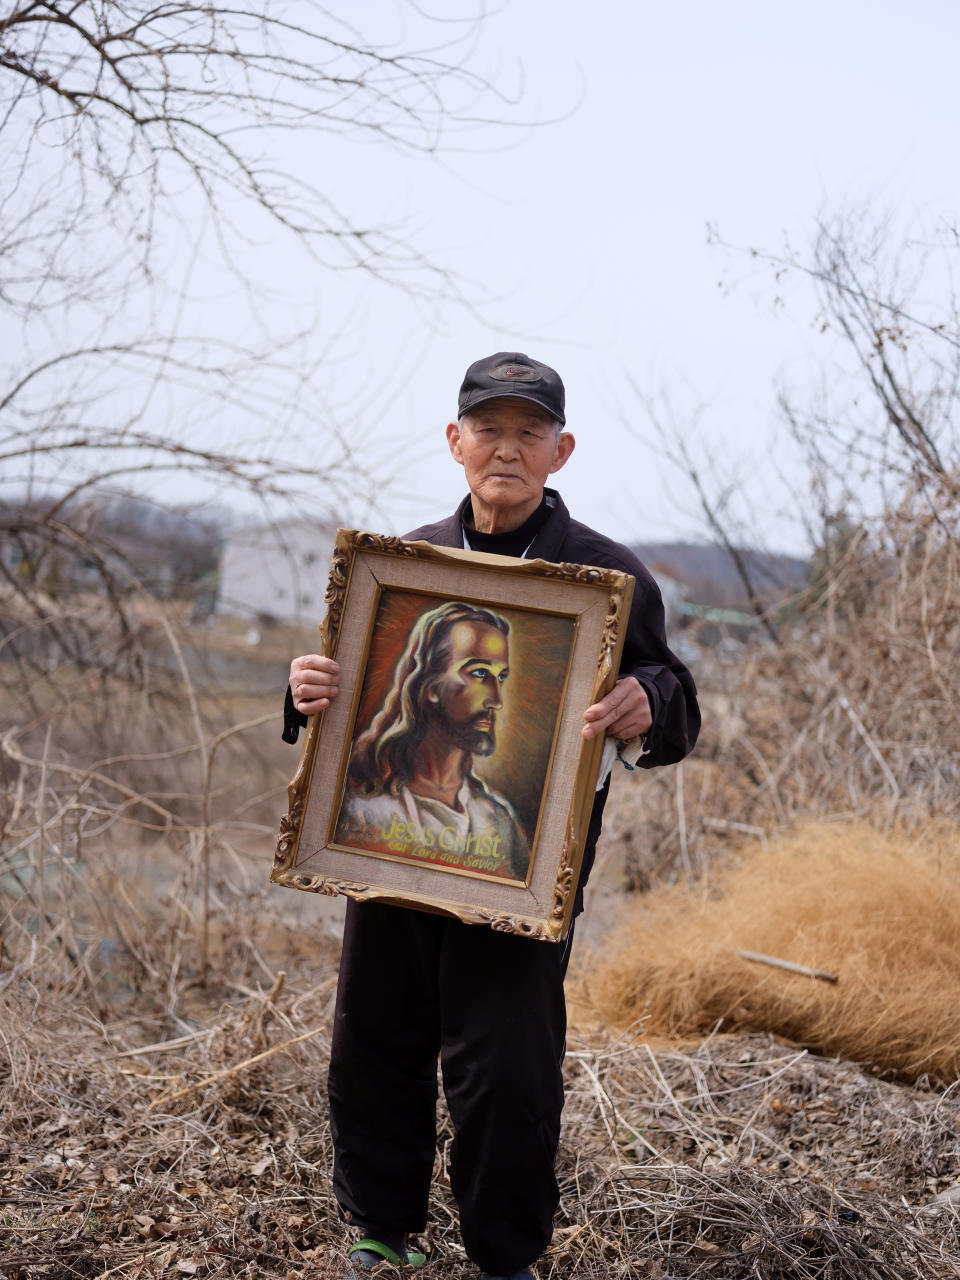 Yoon Seok-sahn, who was separated from his family in the North, poses near his home in Tongilchon.